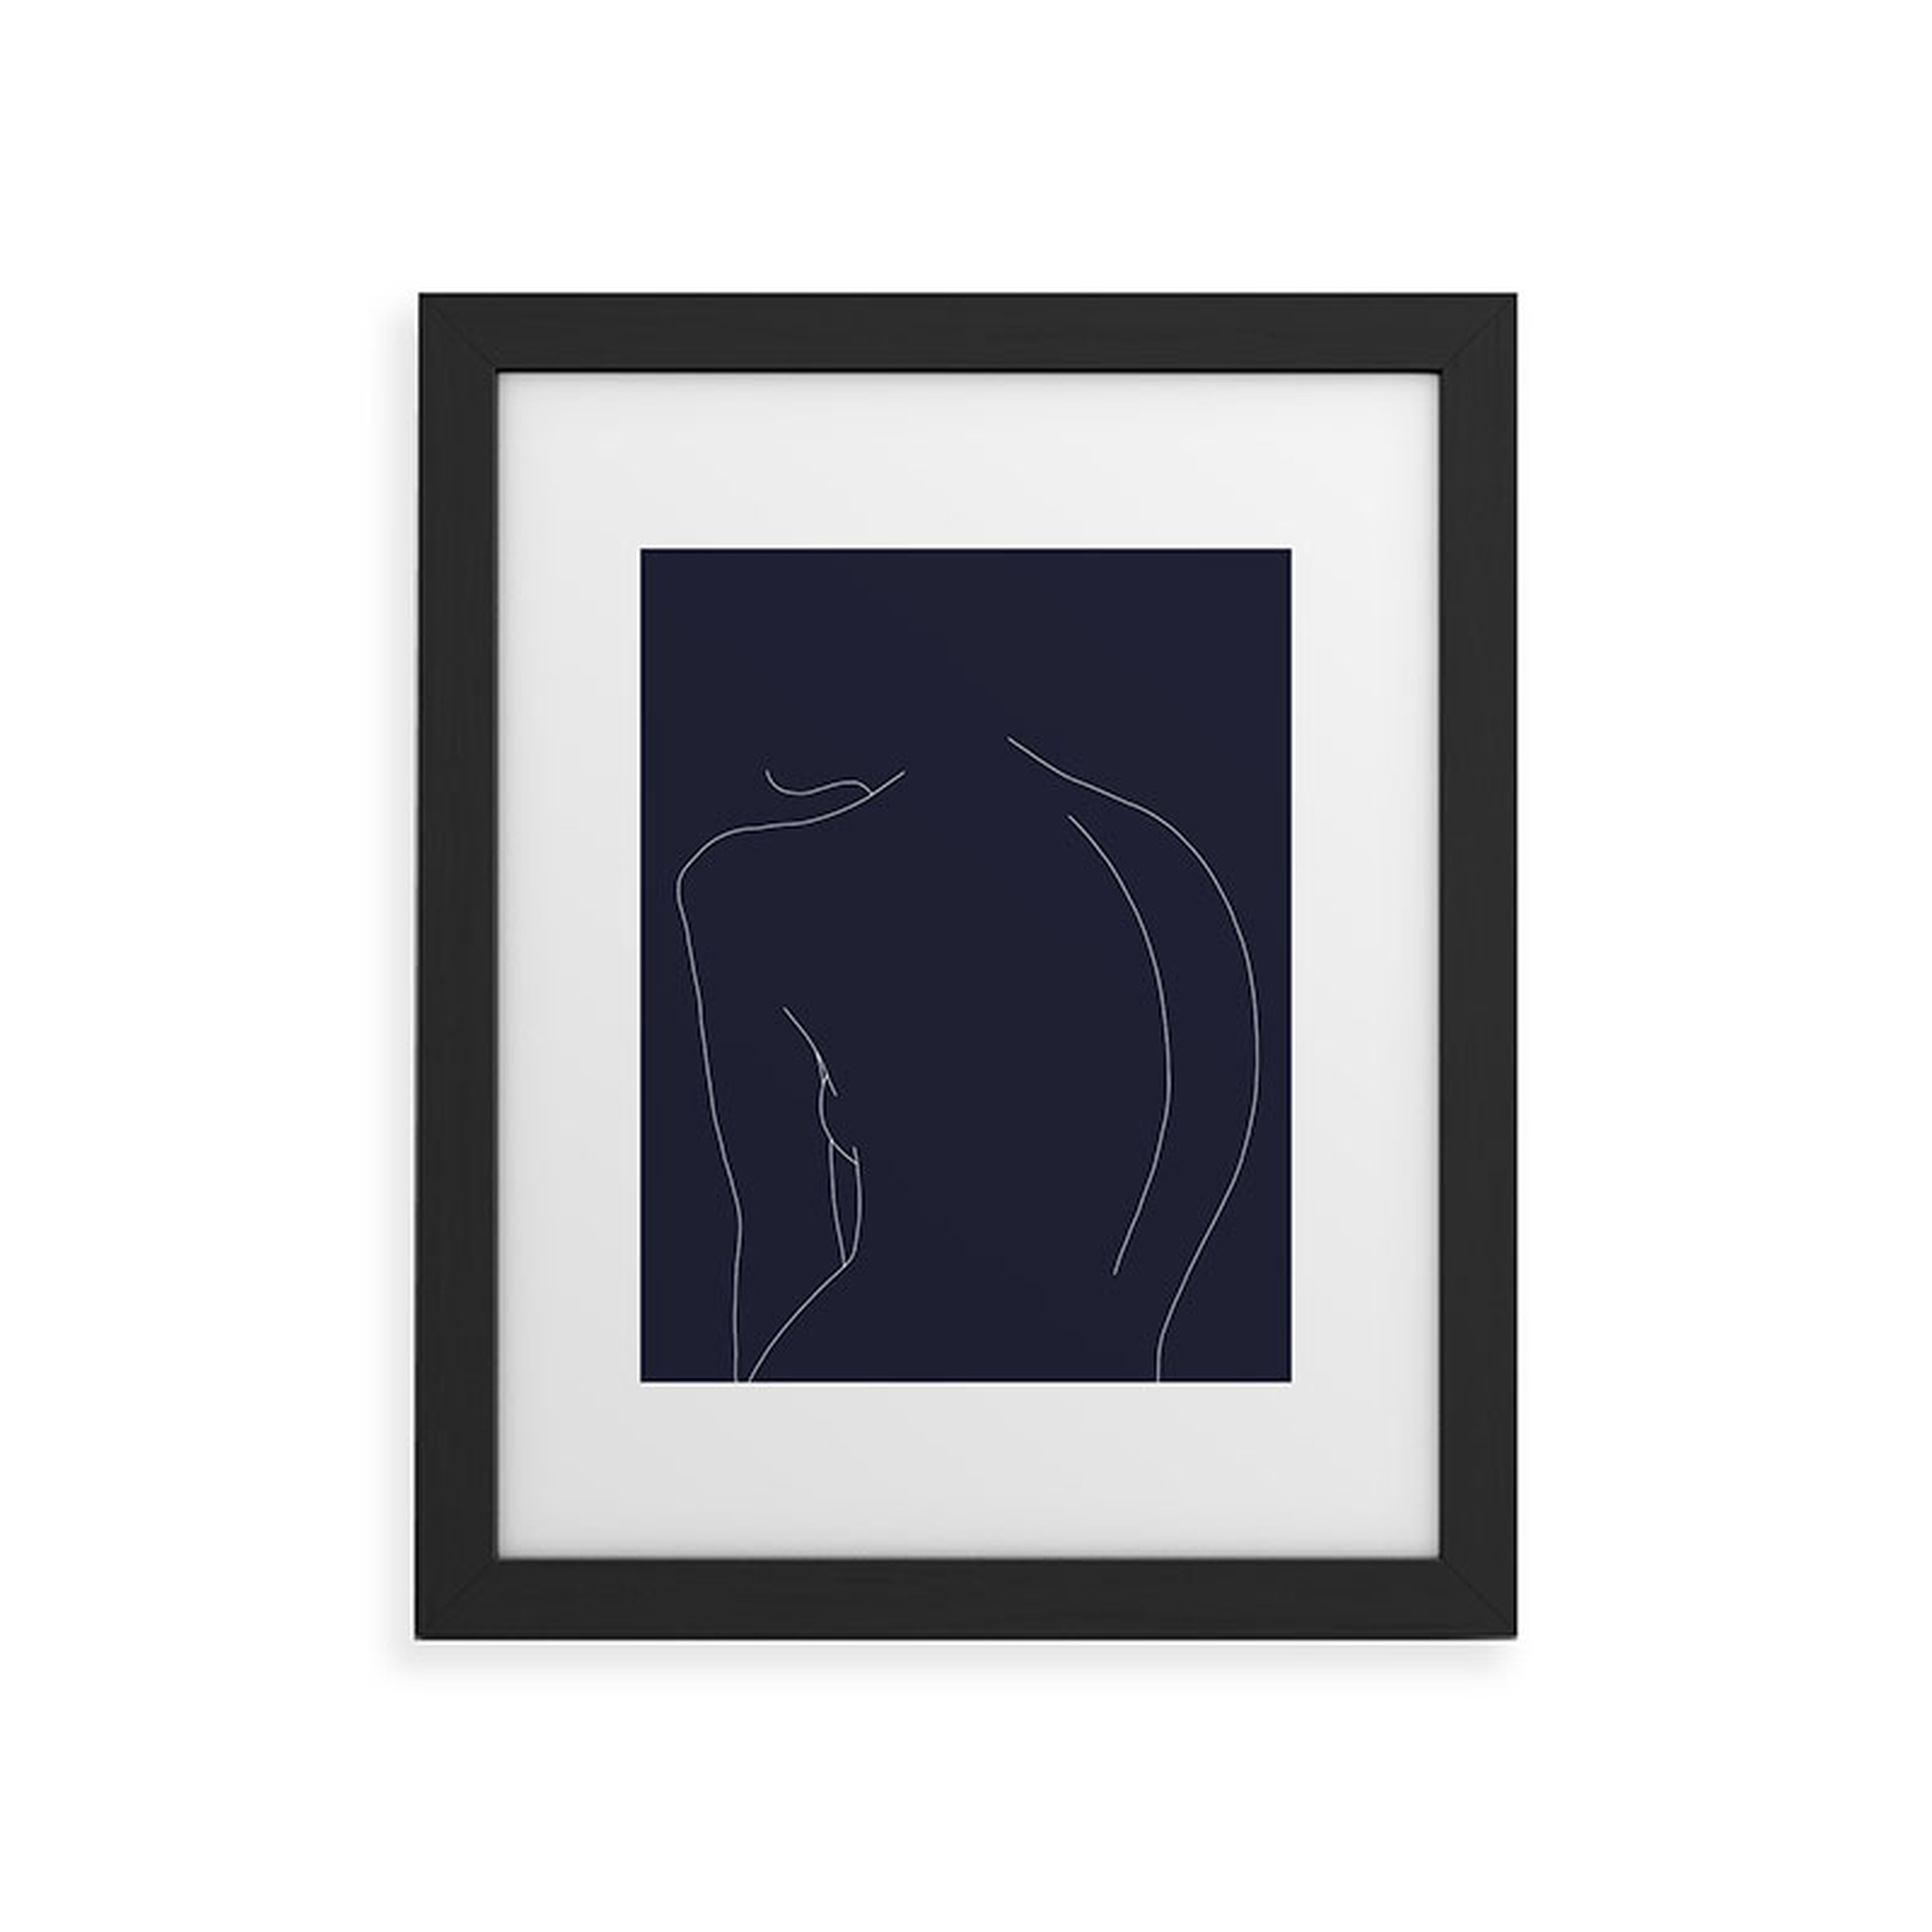 Womans Back Line by The Colour Study - Framed Art Print Classic Black 11" x 14" - Wander Print Co.